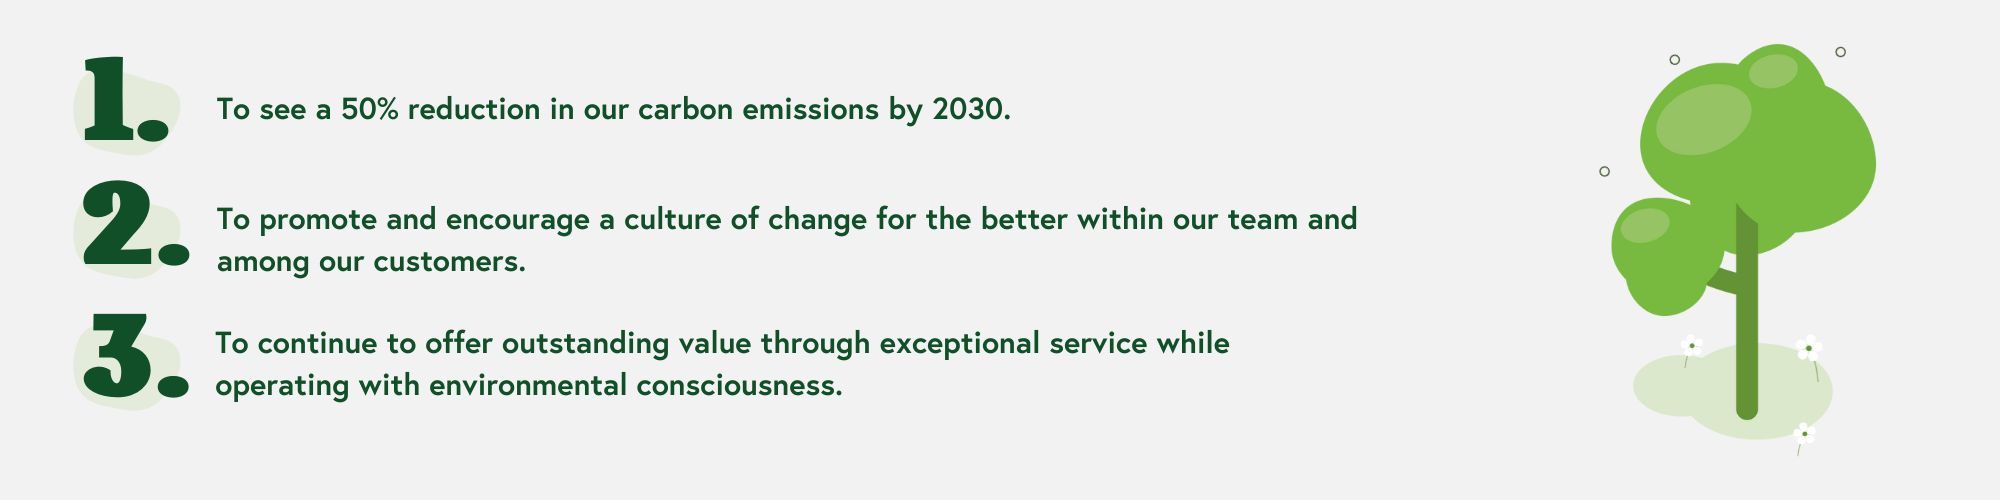 Our Sustainability Aims